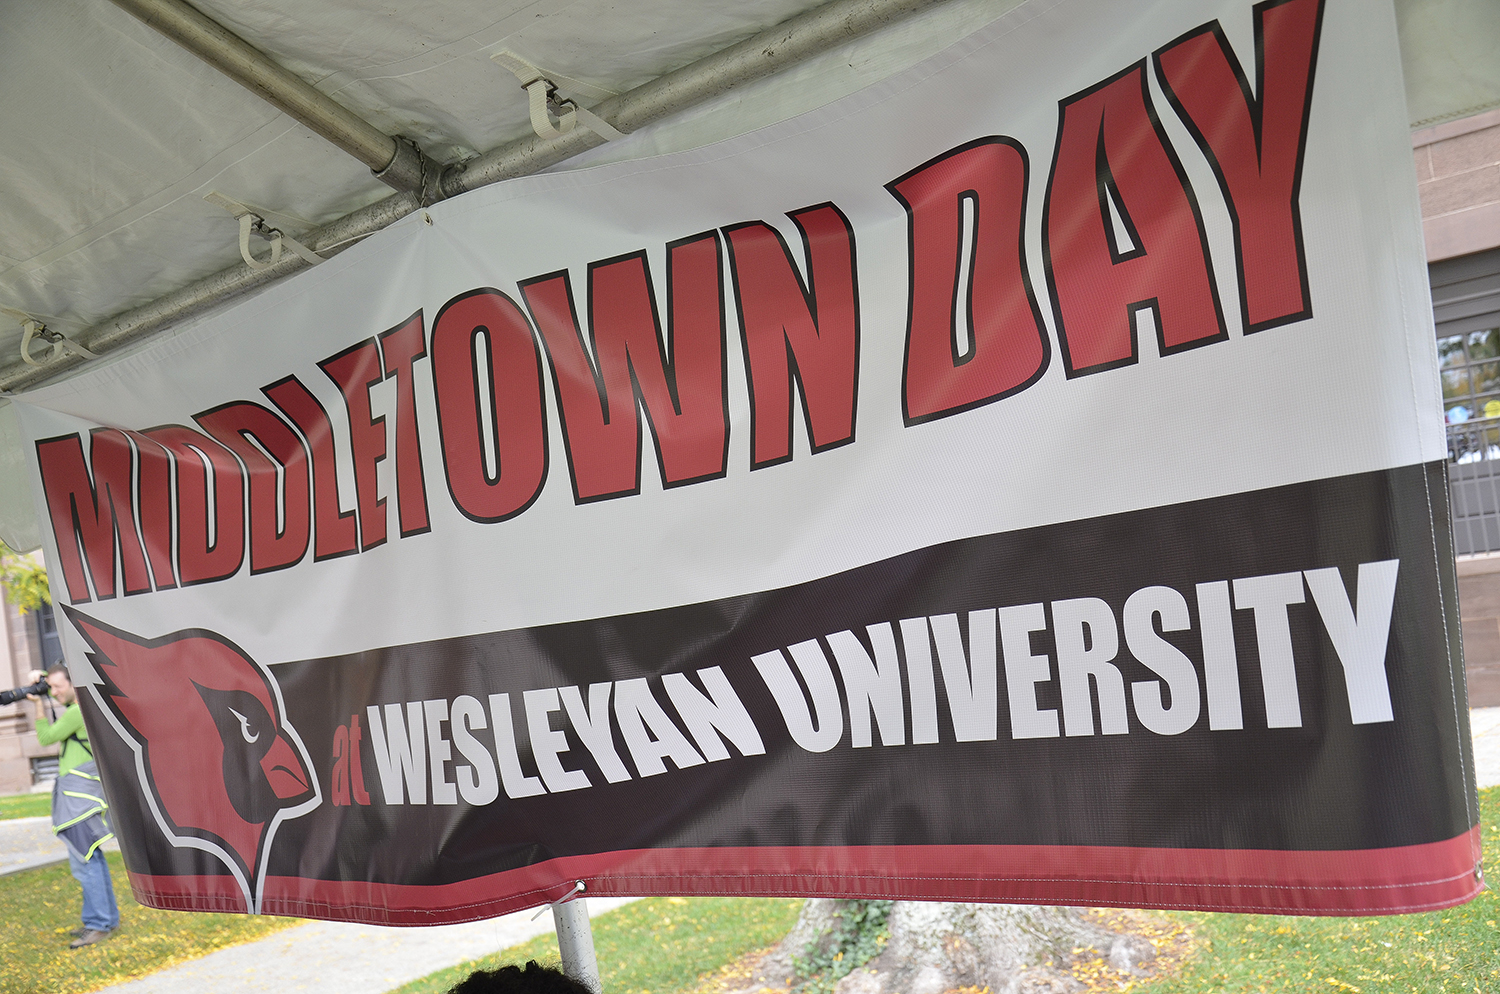 The campus and local community are invited to Middletown Day on Sept. 26 —a day of family fun and athletic events on campus. The theme of this year’s event is “Salute to Service, Honoring Our Veterans.”